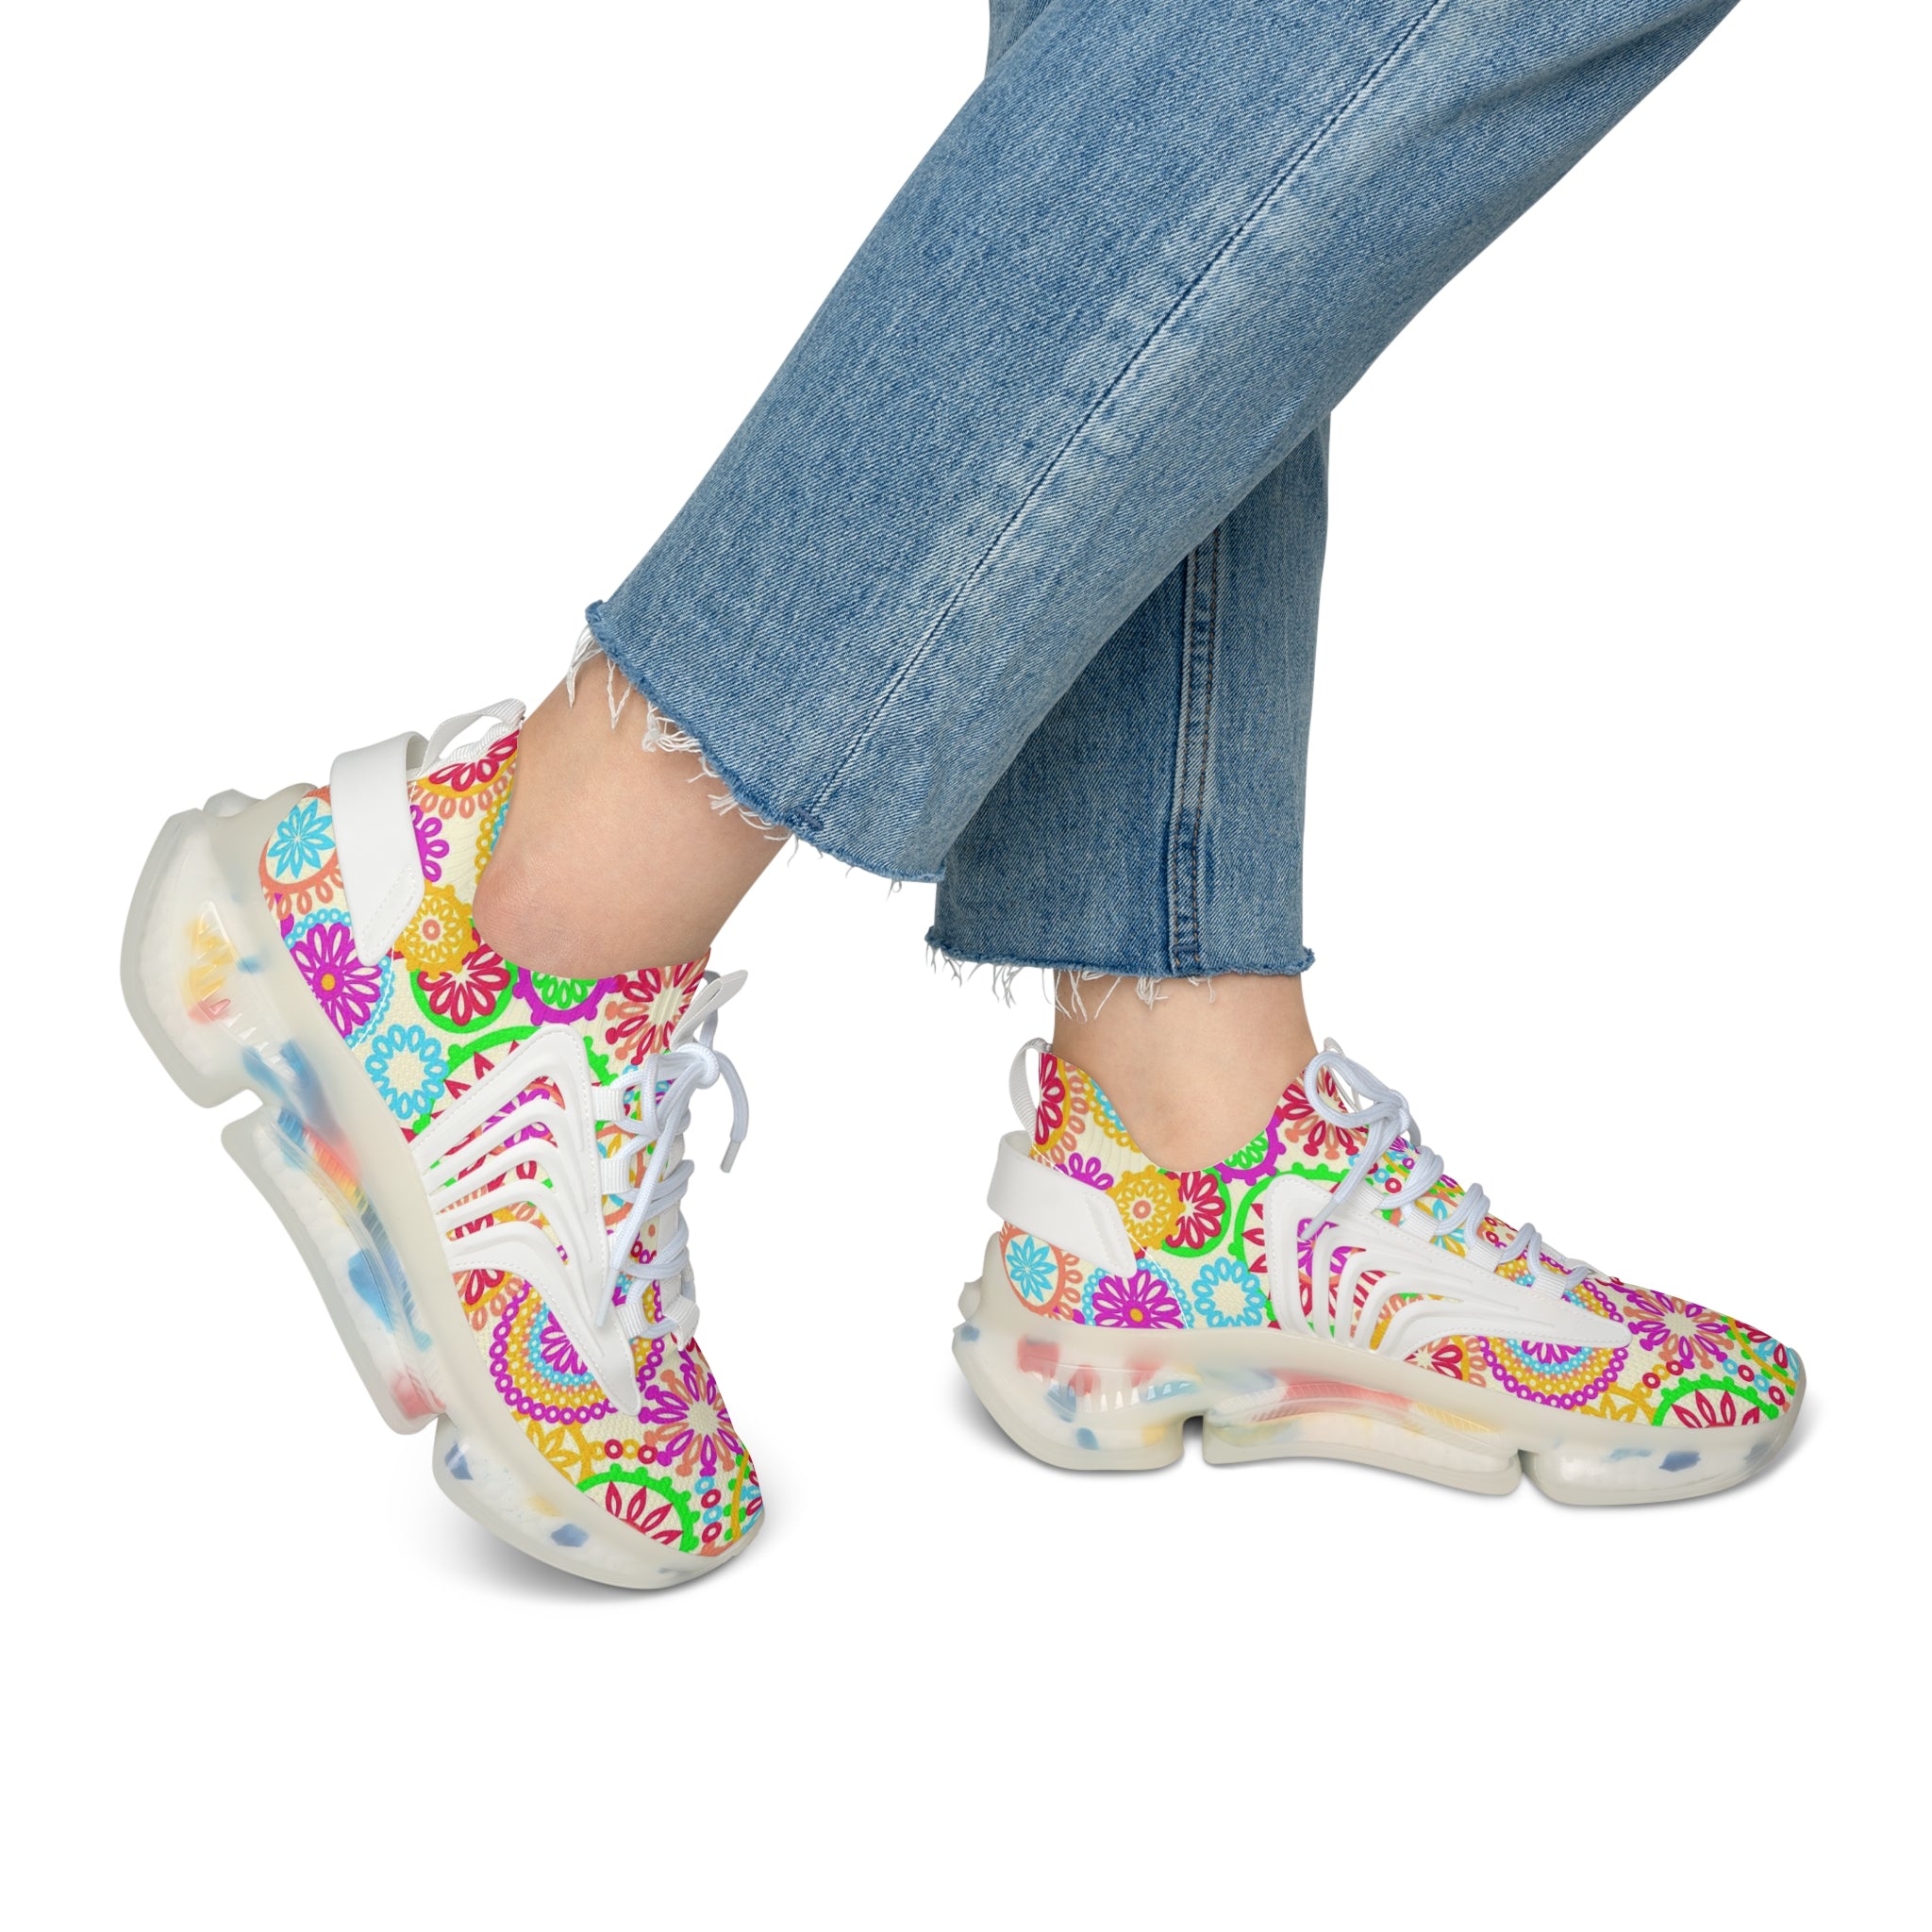 Multicolour psychedelic print women's sneakers